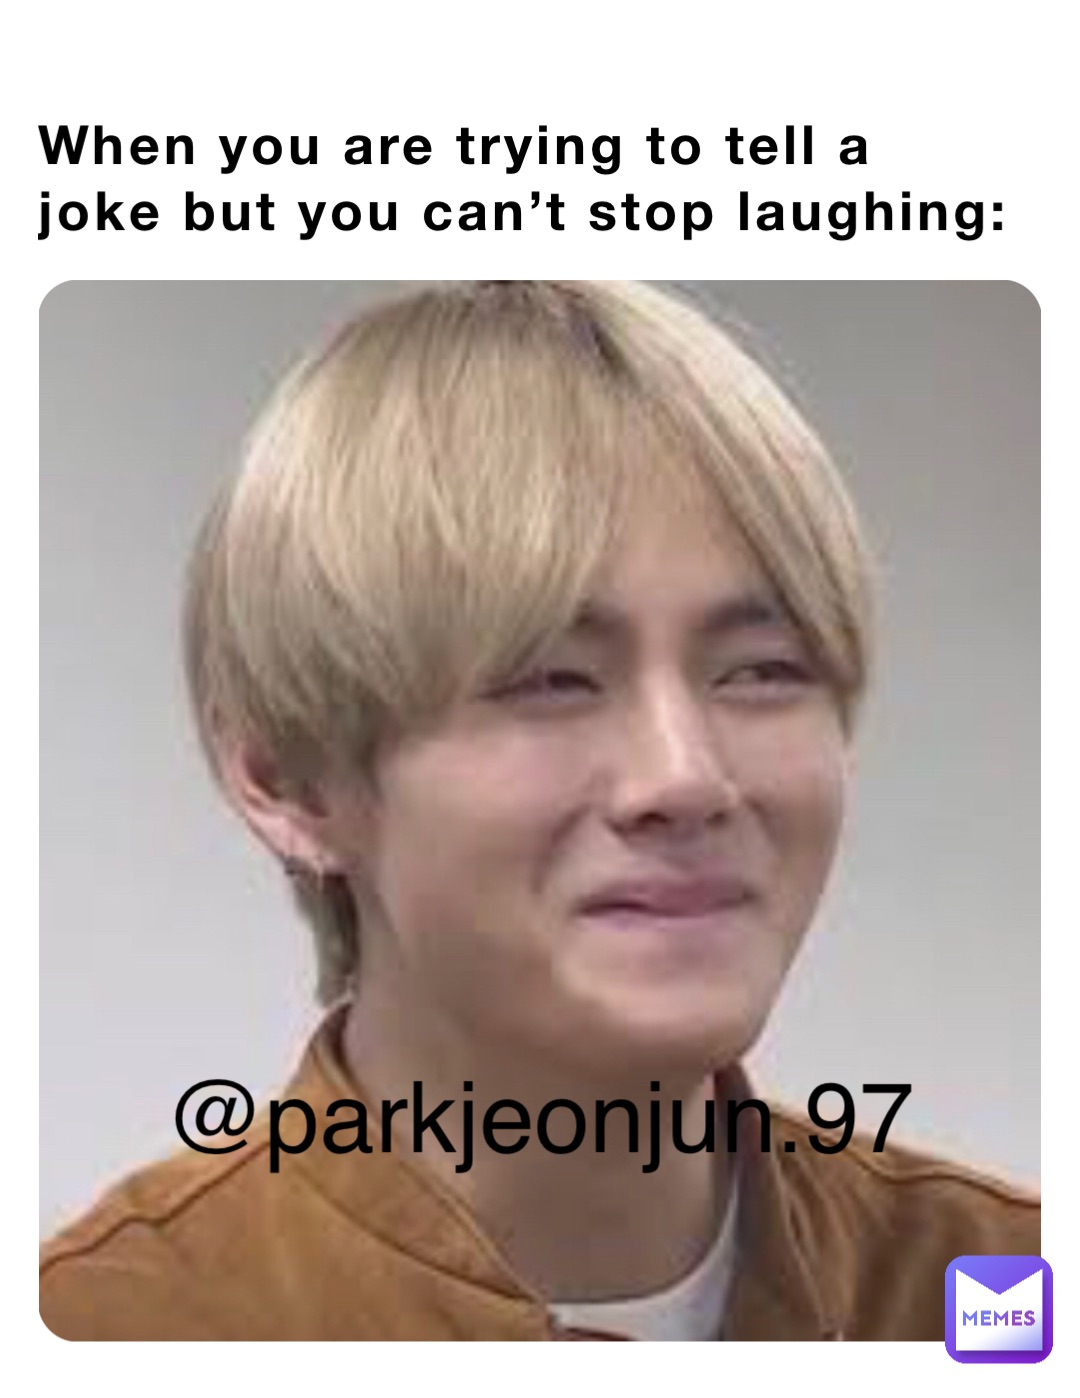 When you are trying to tell a joke but you can’t stop laughing: @parkjeonjun.97